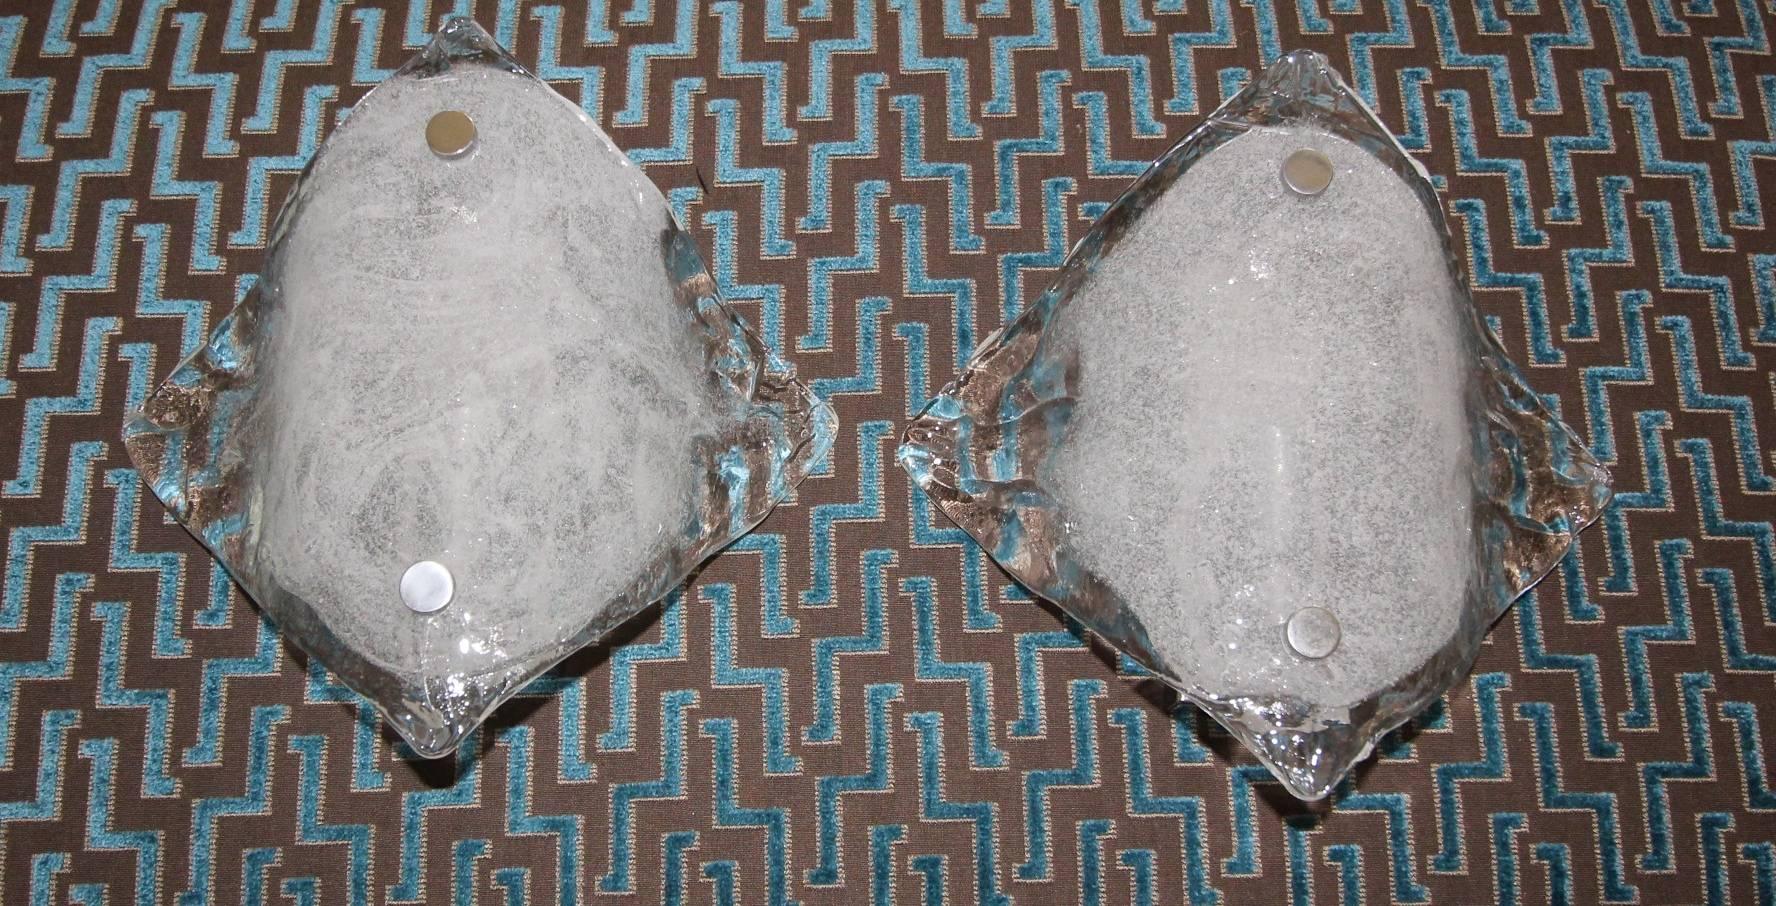 Pair of clear and opaque glass sconces by J. T. Kalmar, mounted on nickel backplates and fittings. Takes one 40 watt candelabra size bulb, newly wired.
Glass size: 9.5